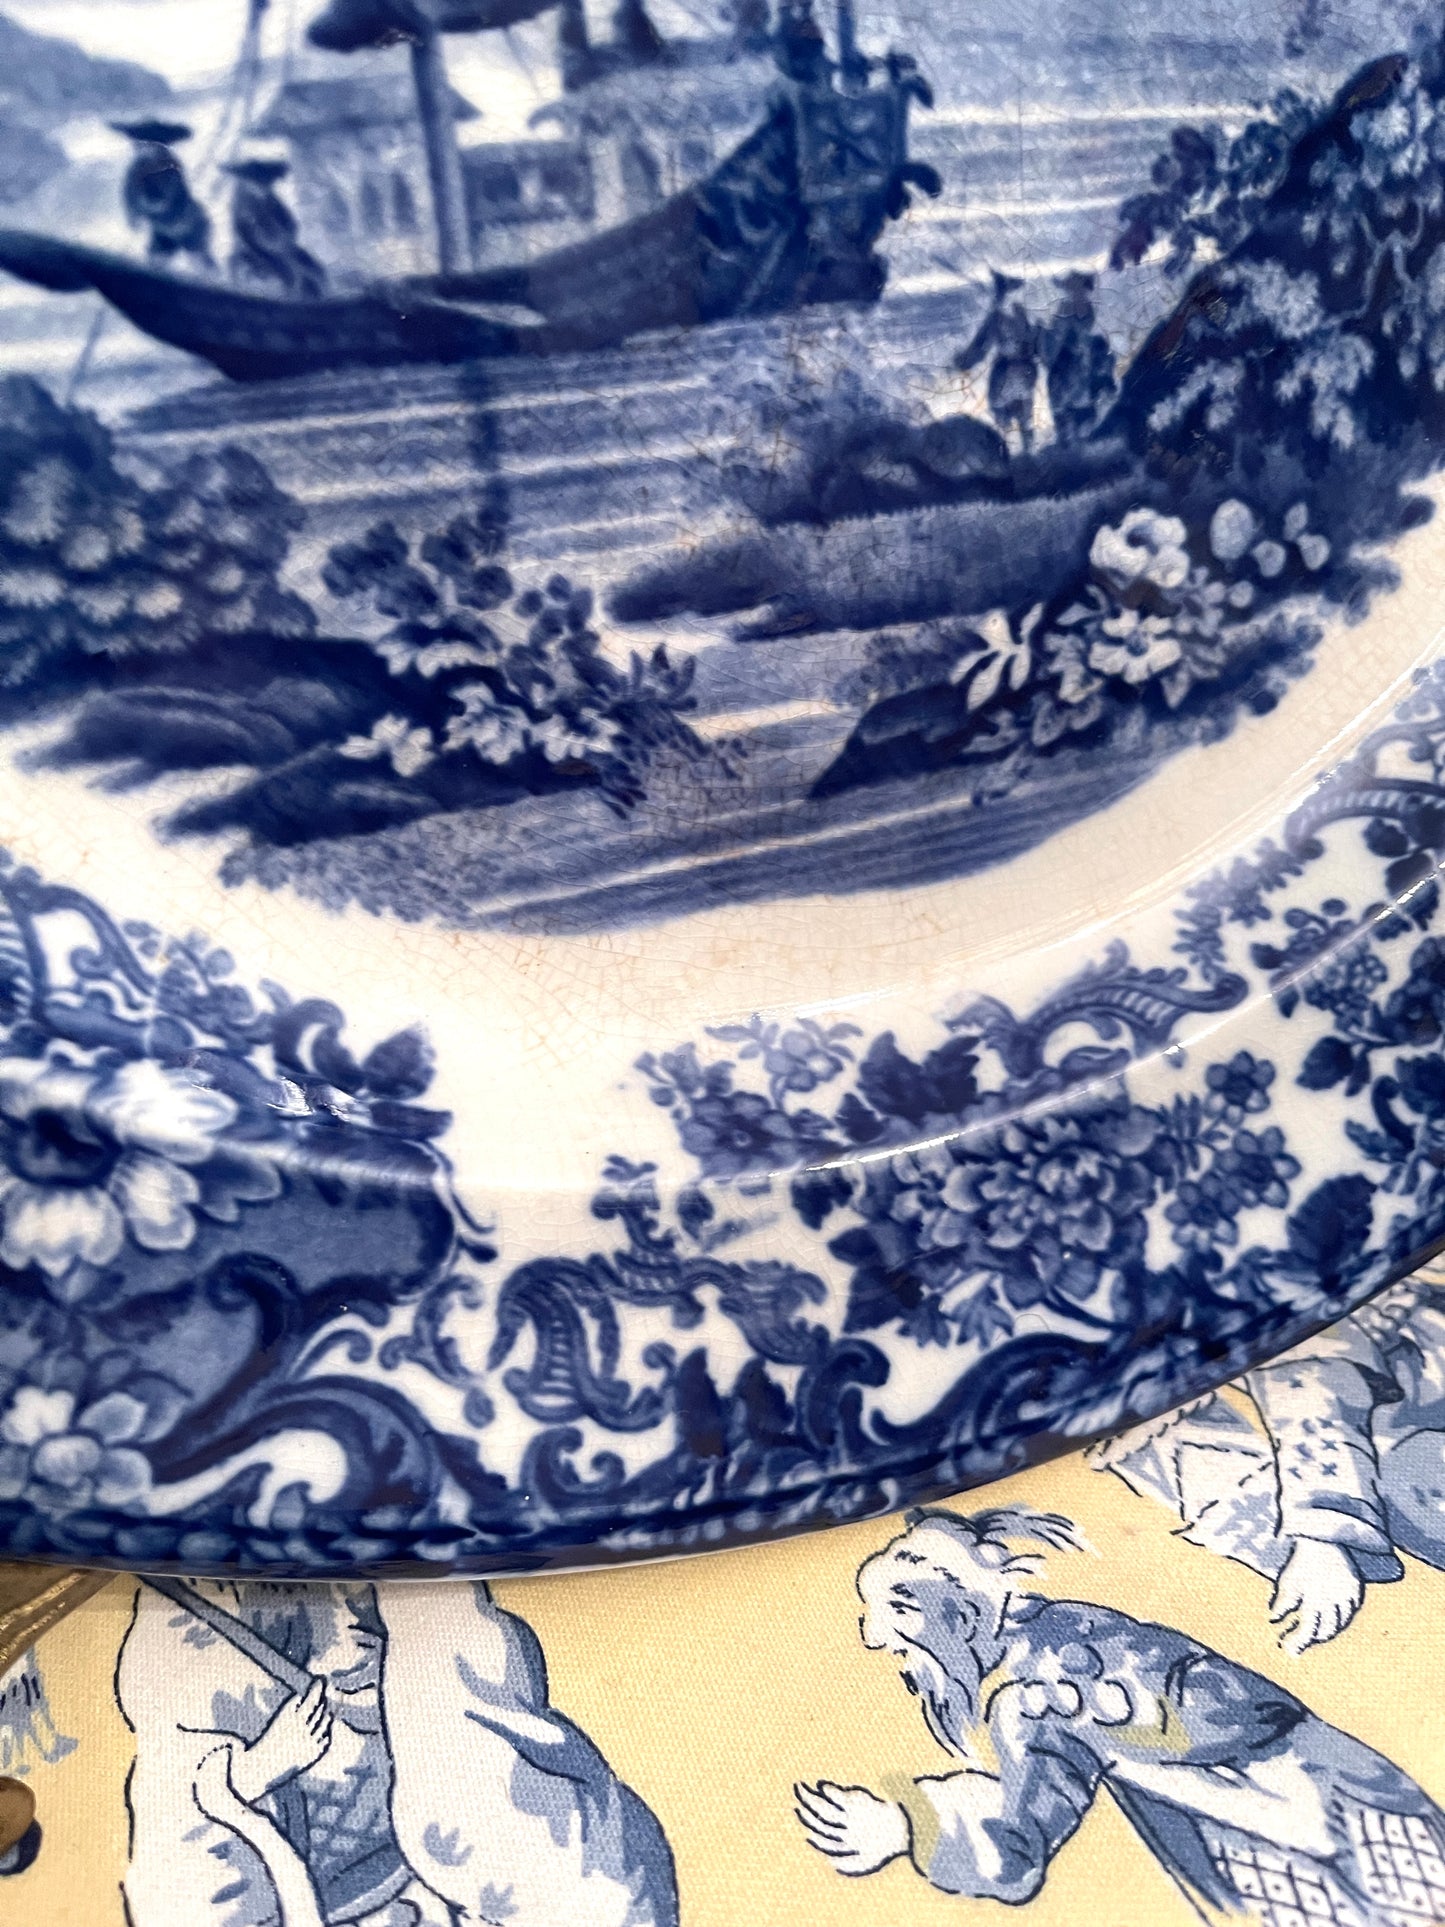 Large Antique Chinoiserie Wedgwood Platter, Blue and White